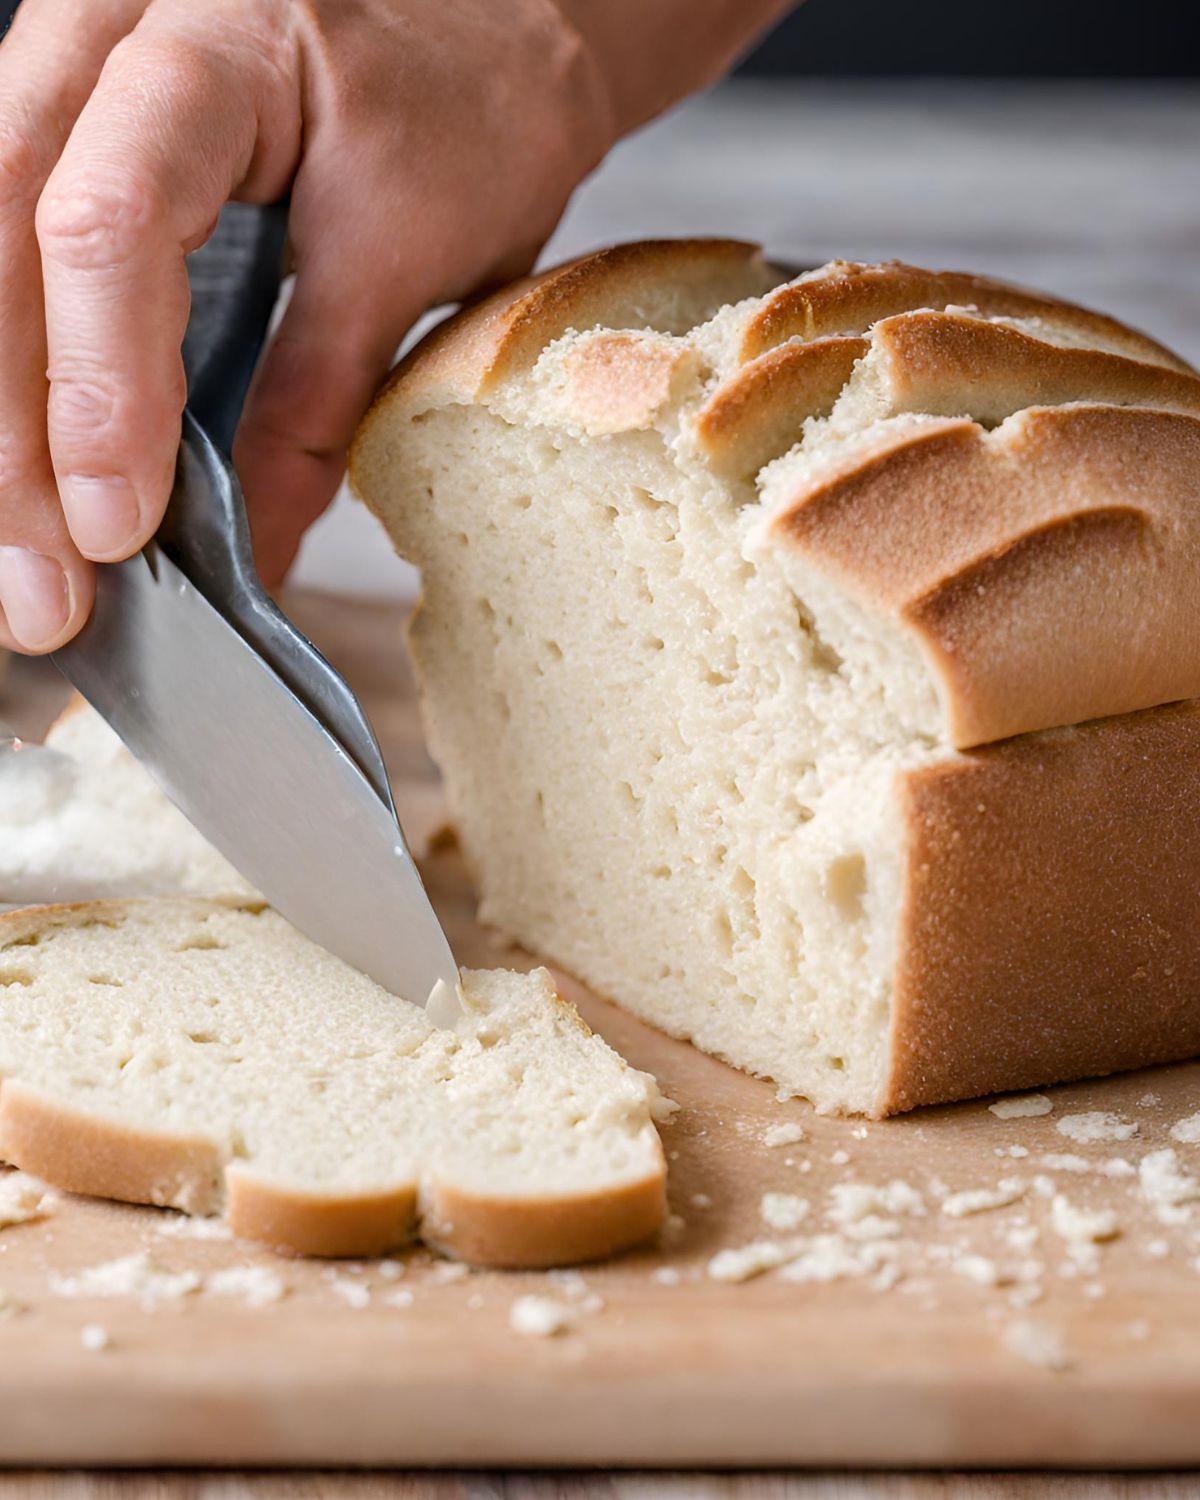 Cutting the crust off the bread.